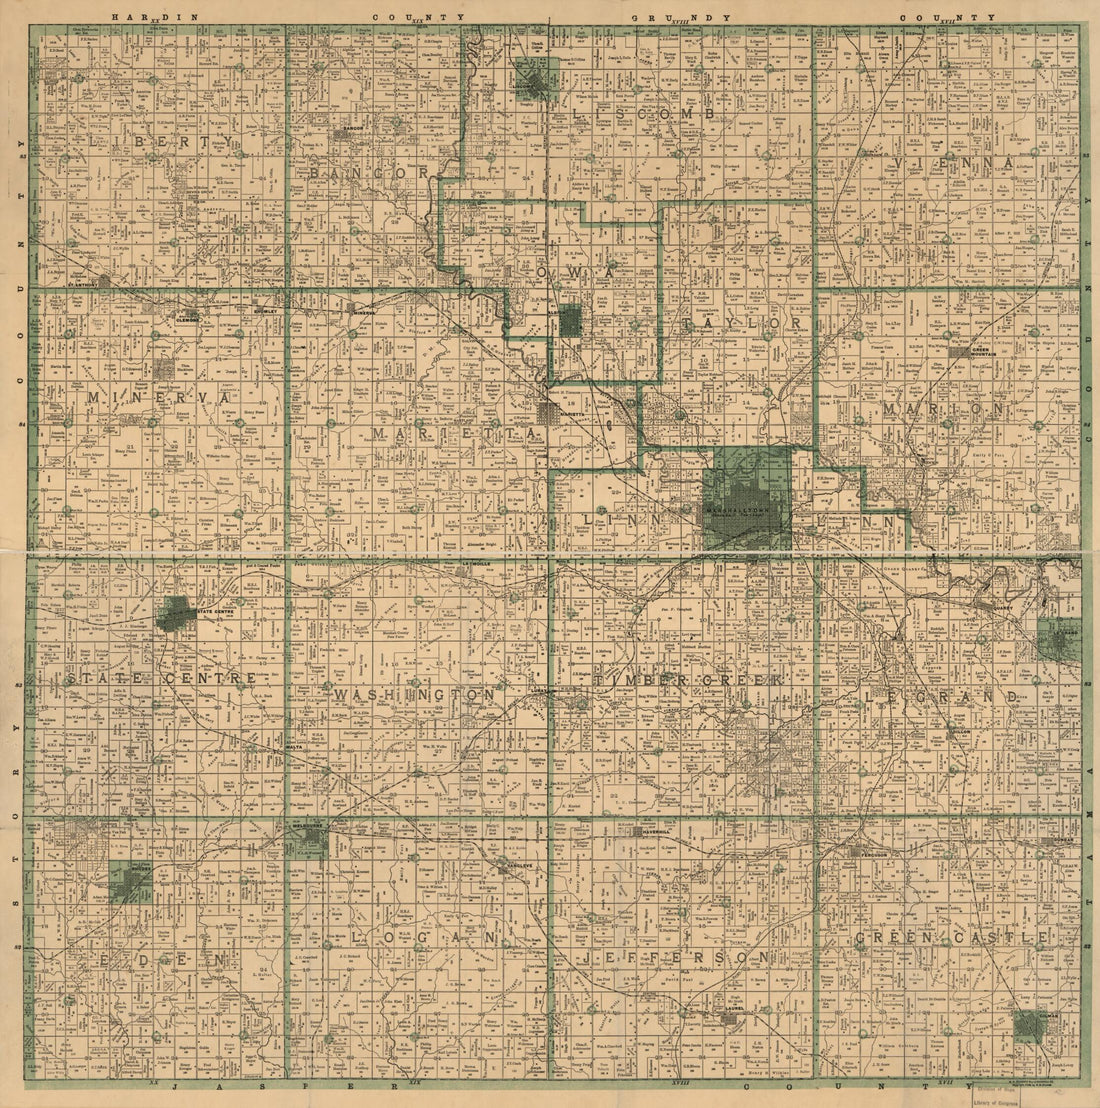 This old map of Melzar M. Dickson&